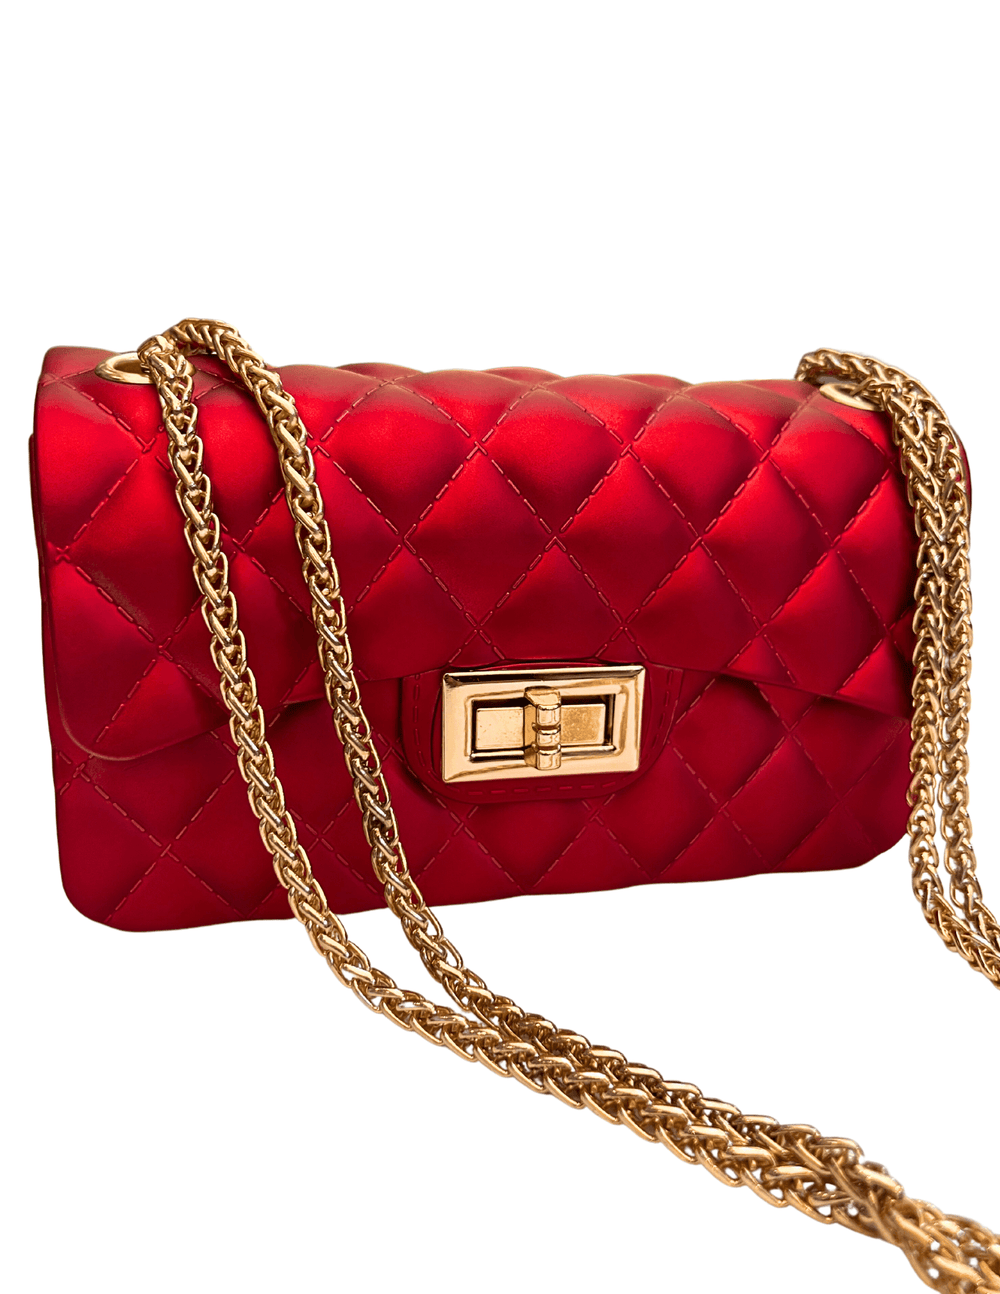 Chanel iridescent red gold rubber jelly purse womens gift ideas red